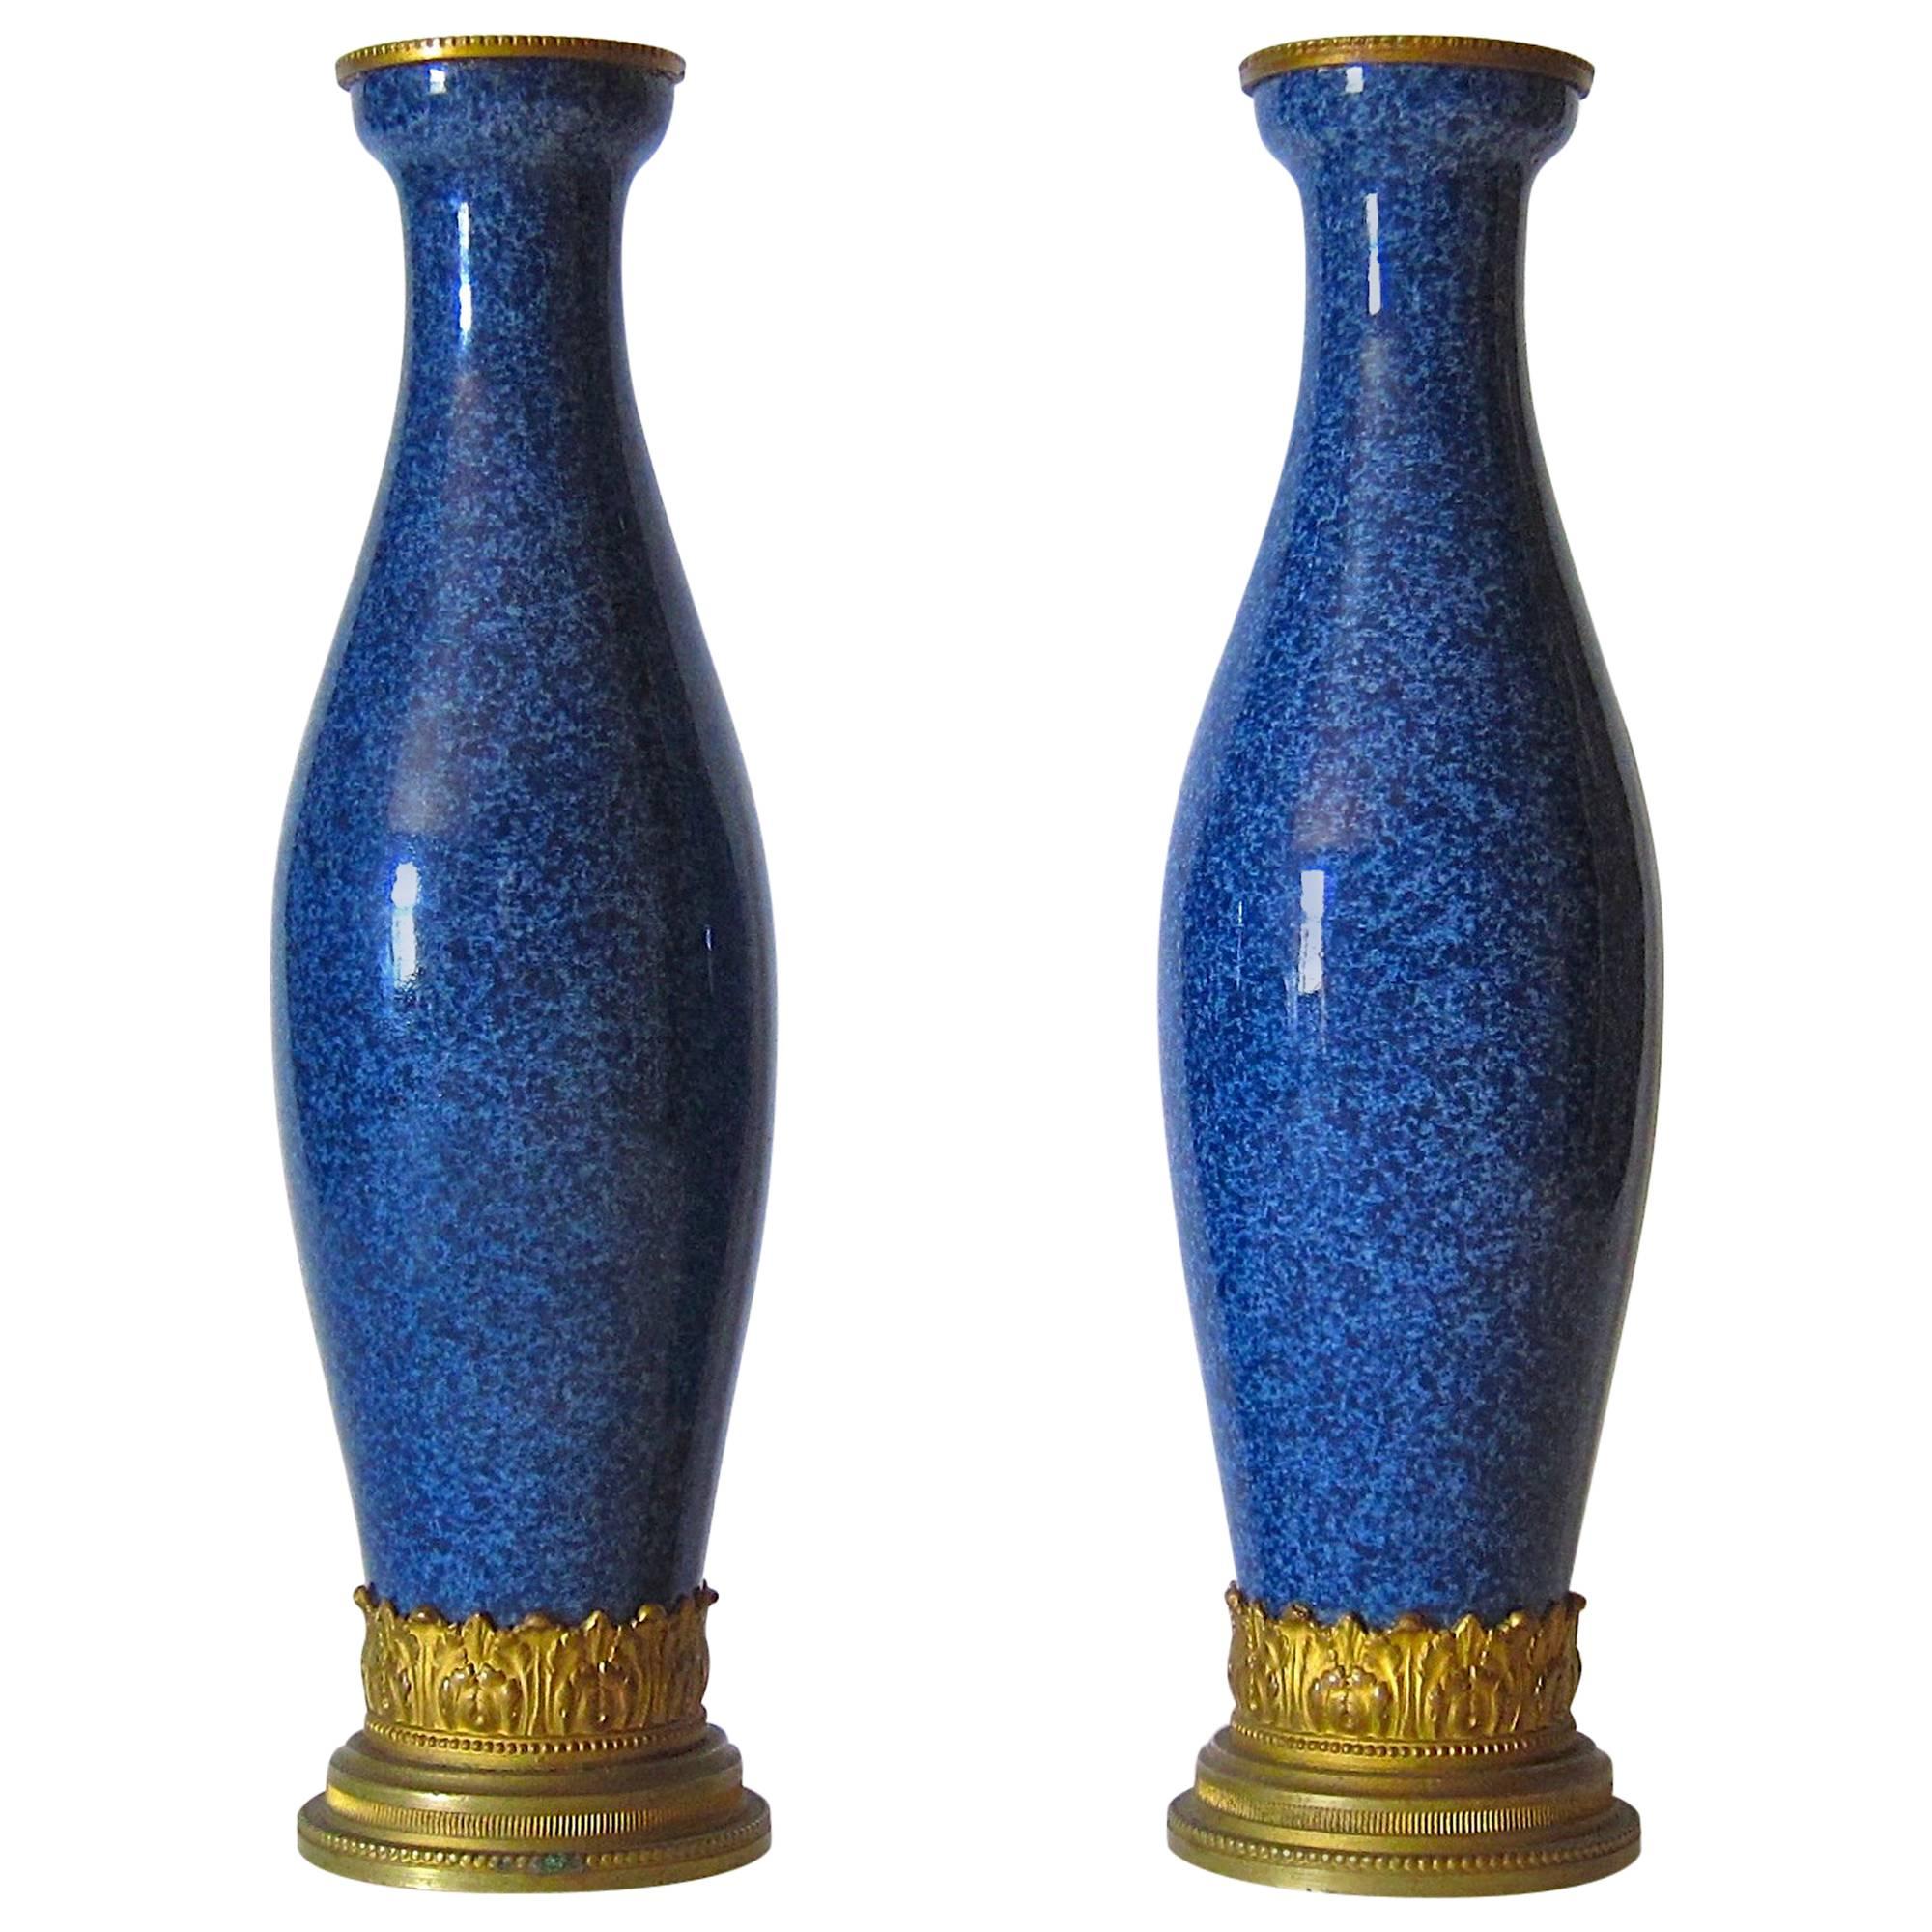 Paul Milet French Faience Vase Pair with Neoclassical Gilt Bronze Mounts